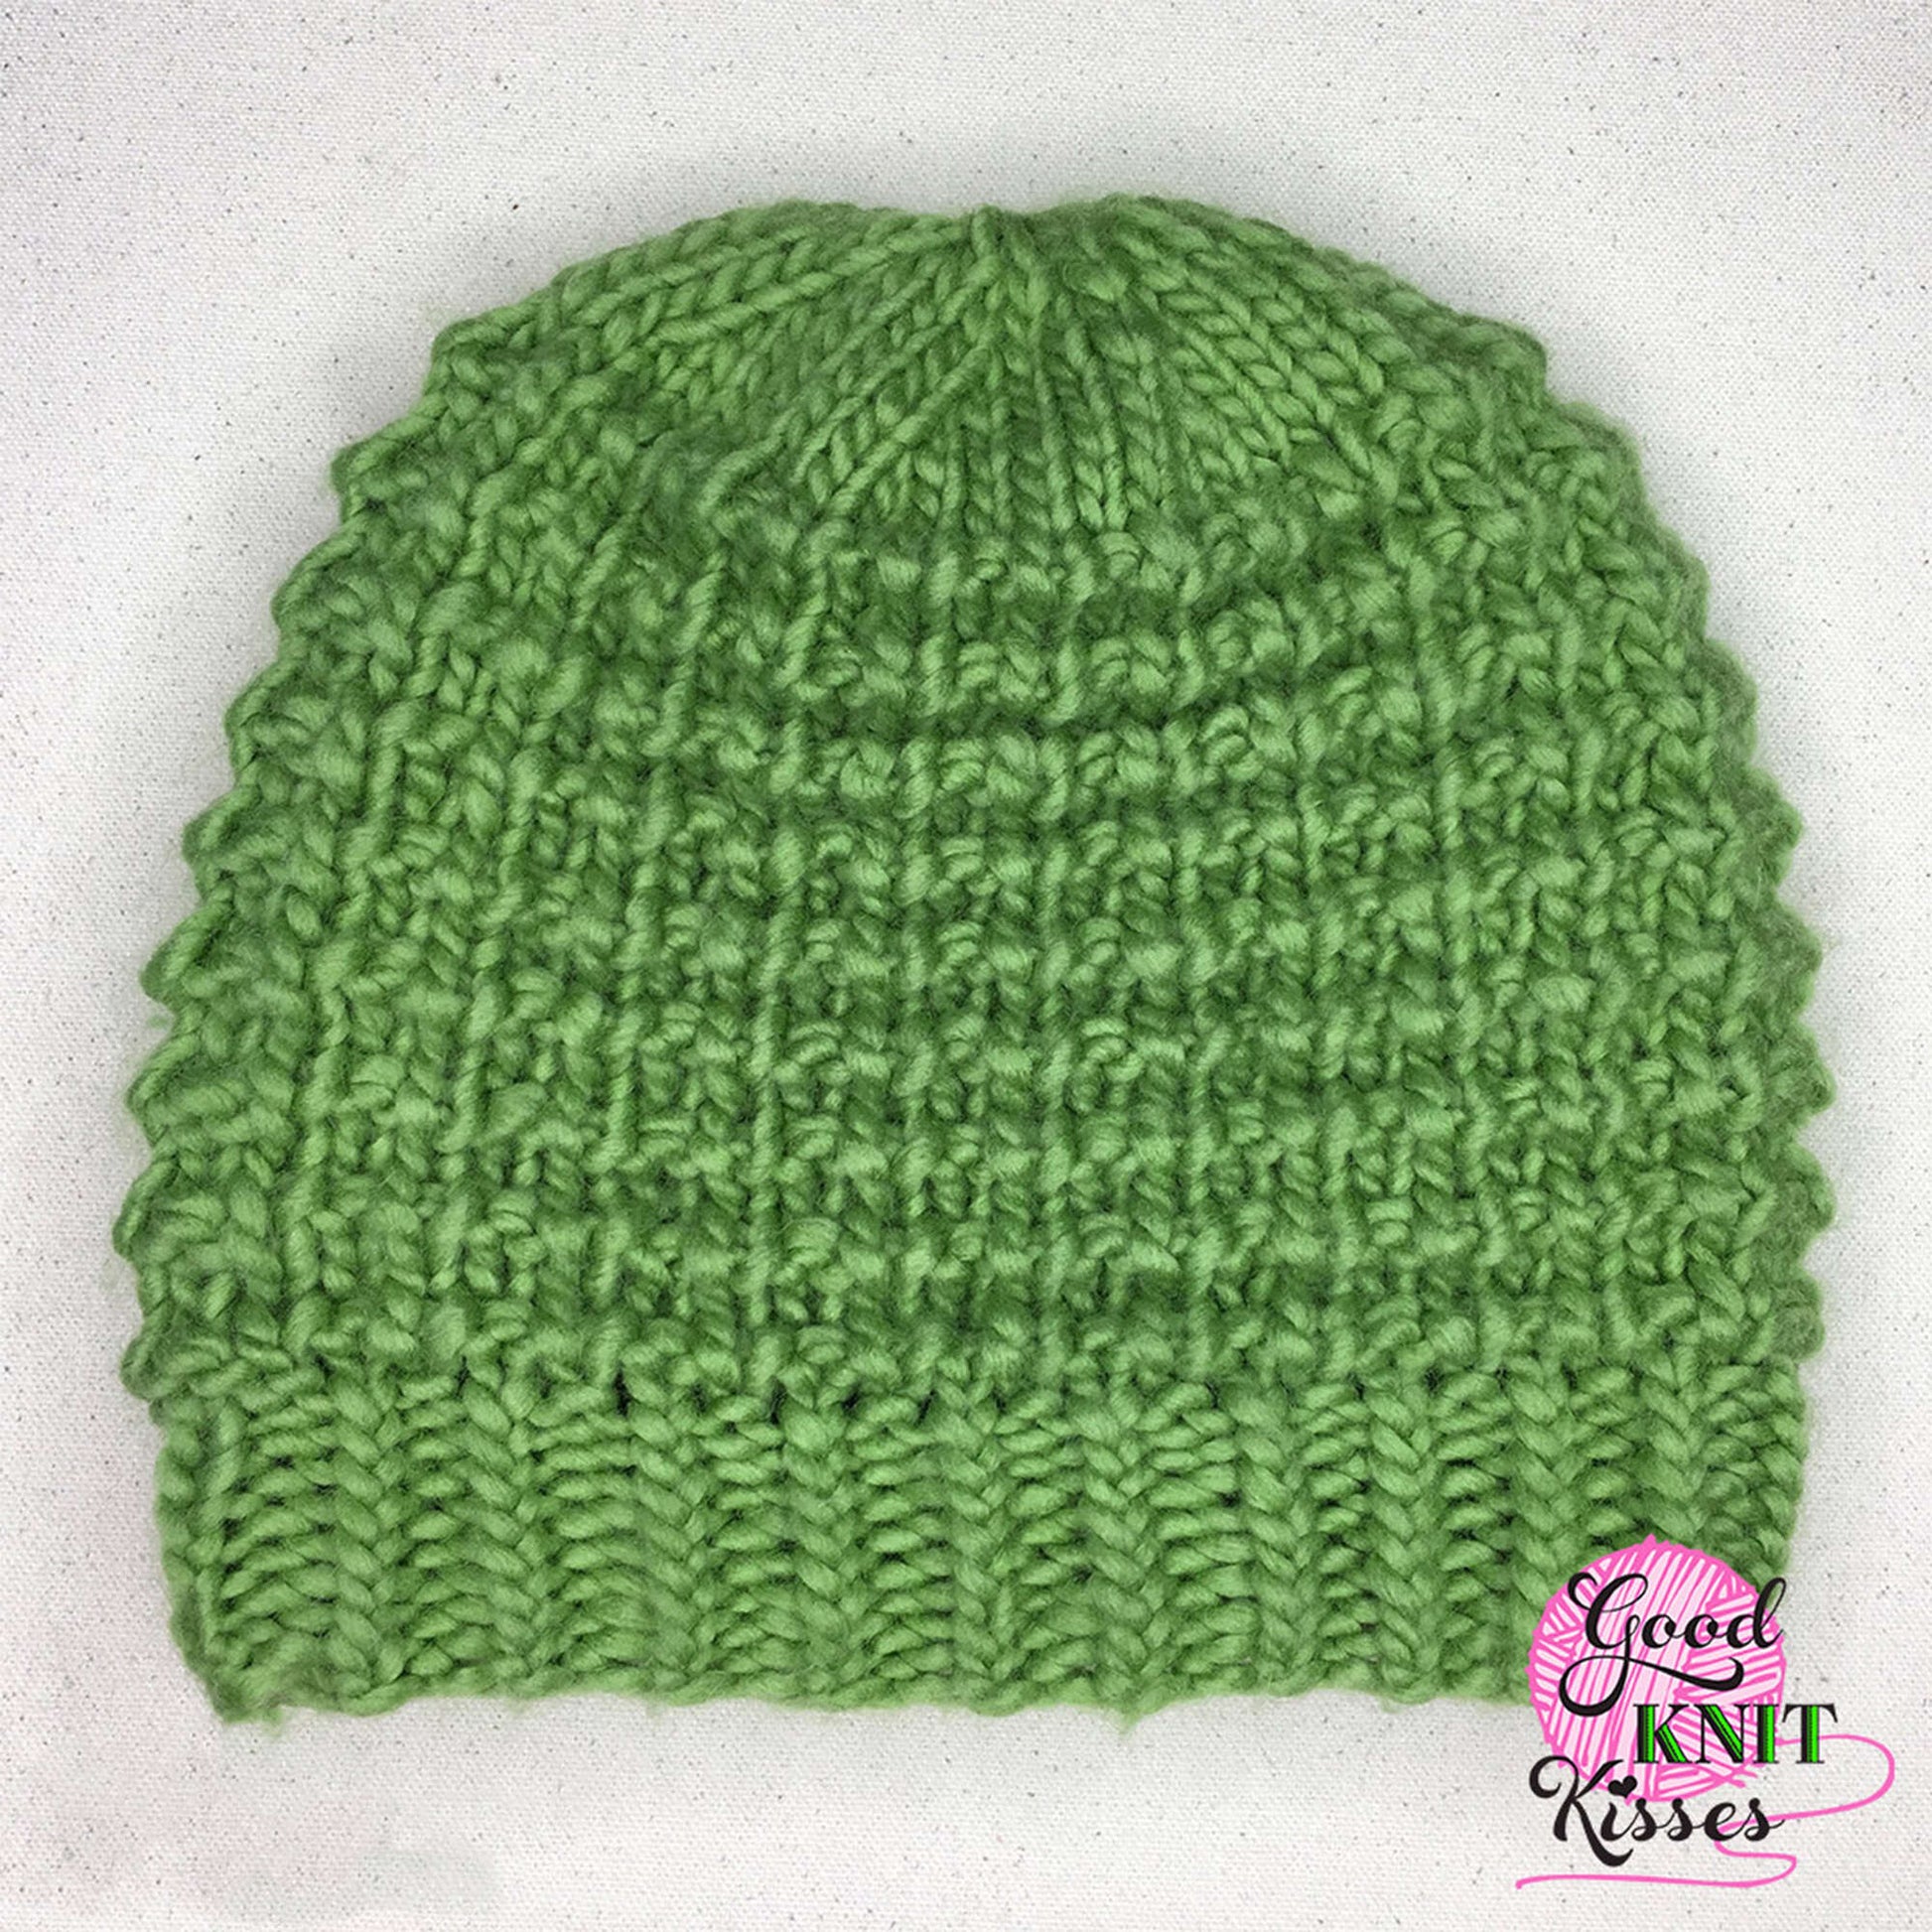 How to Loom Knit a Hat for Beginners - GoodKnit Kisses